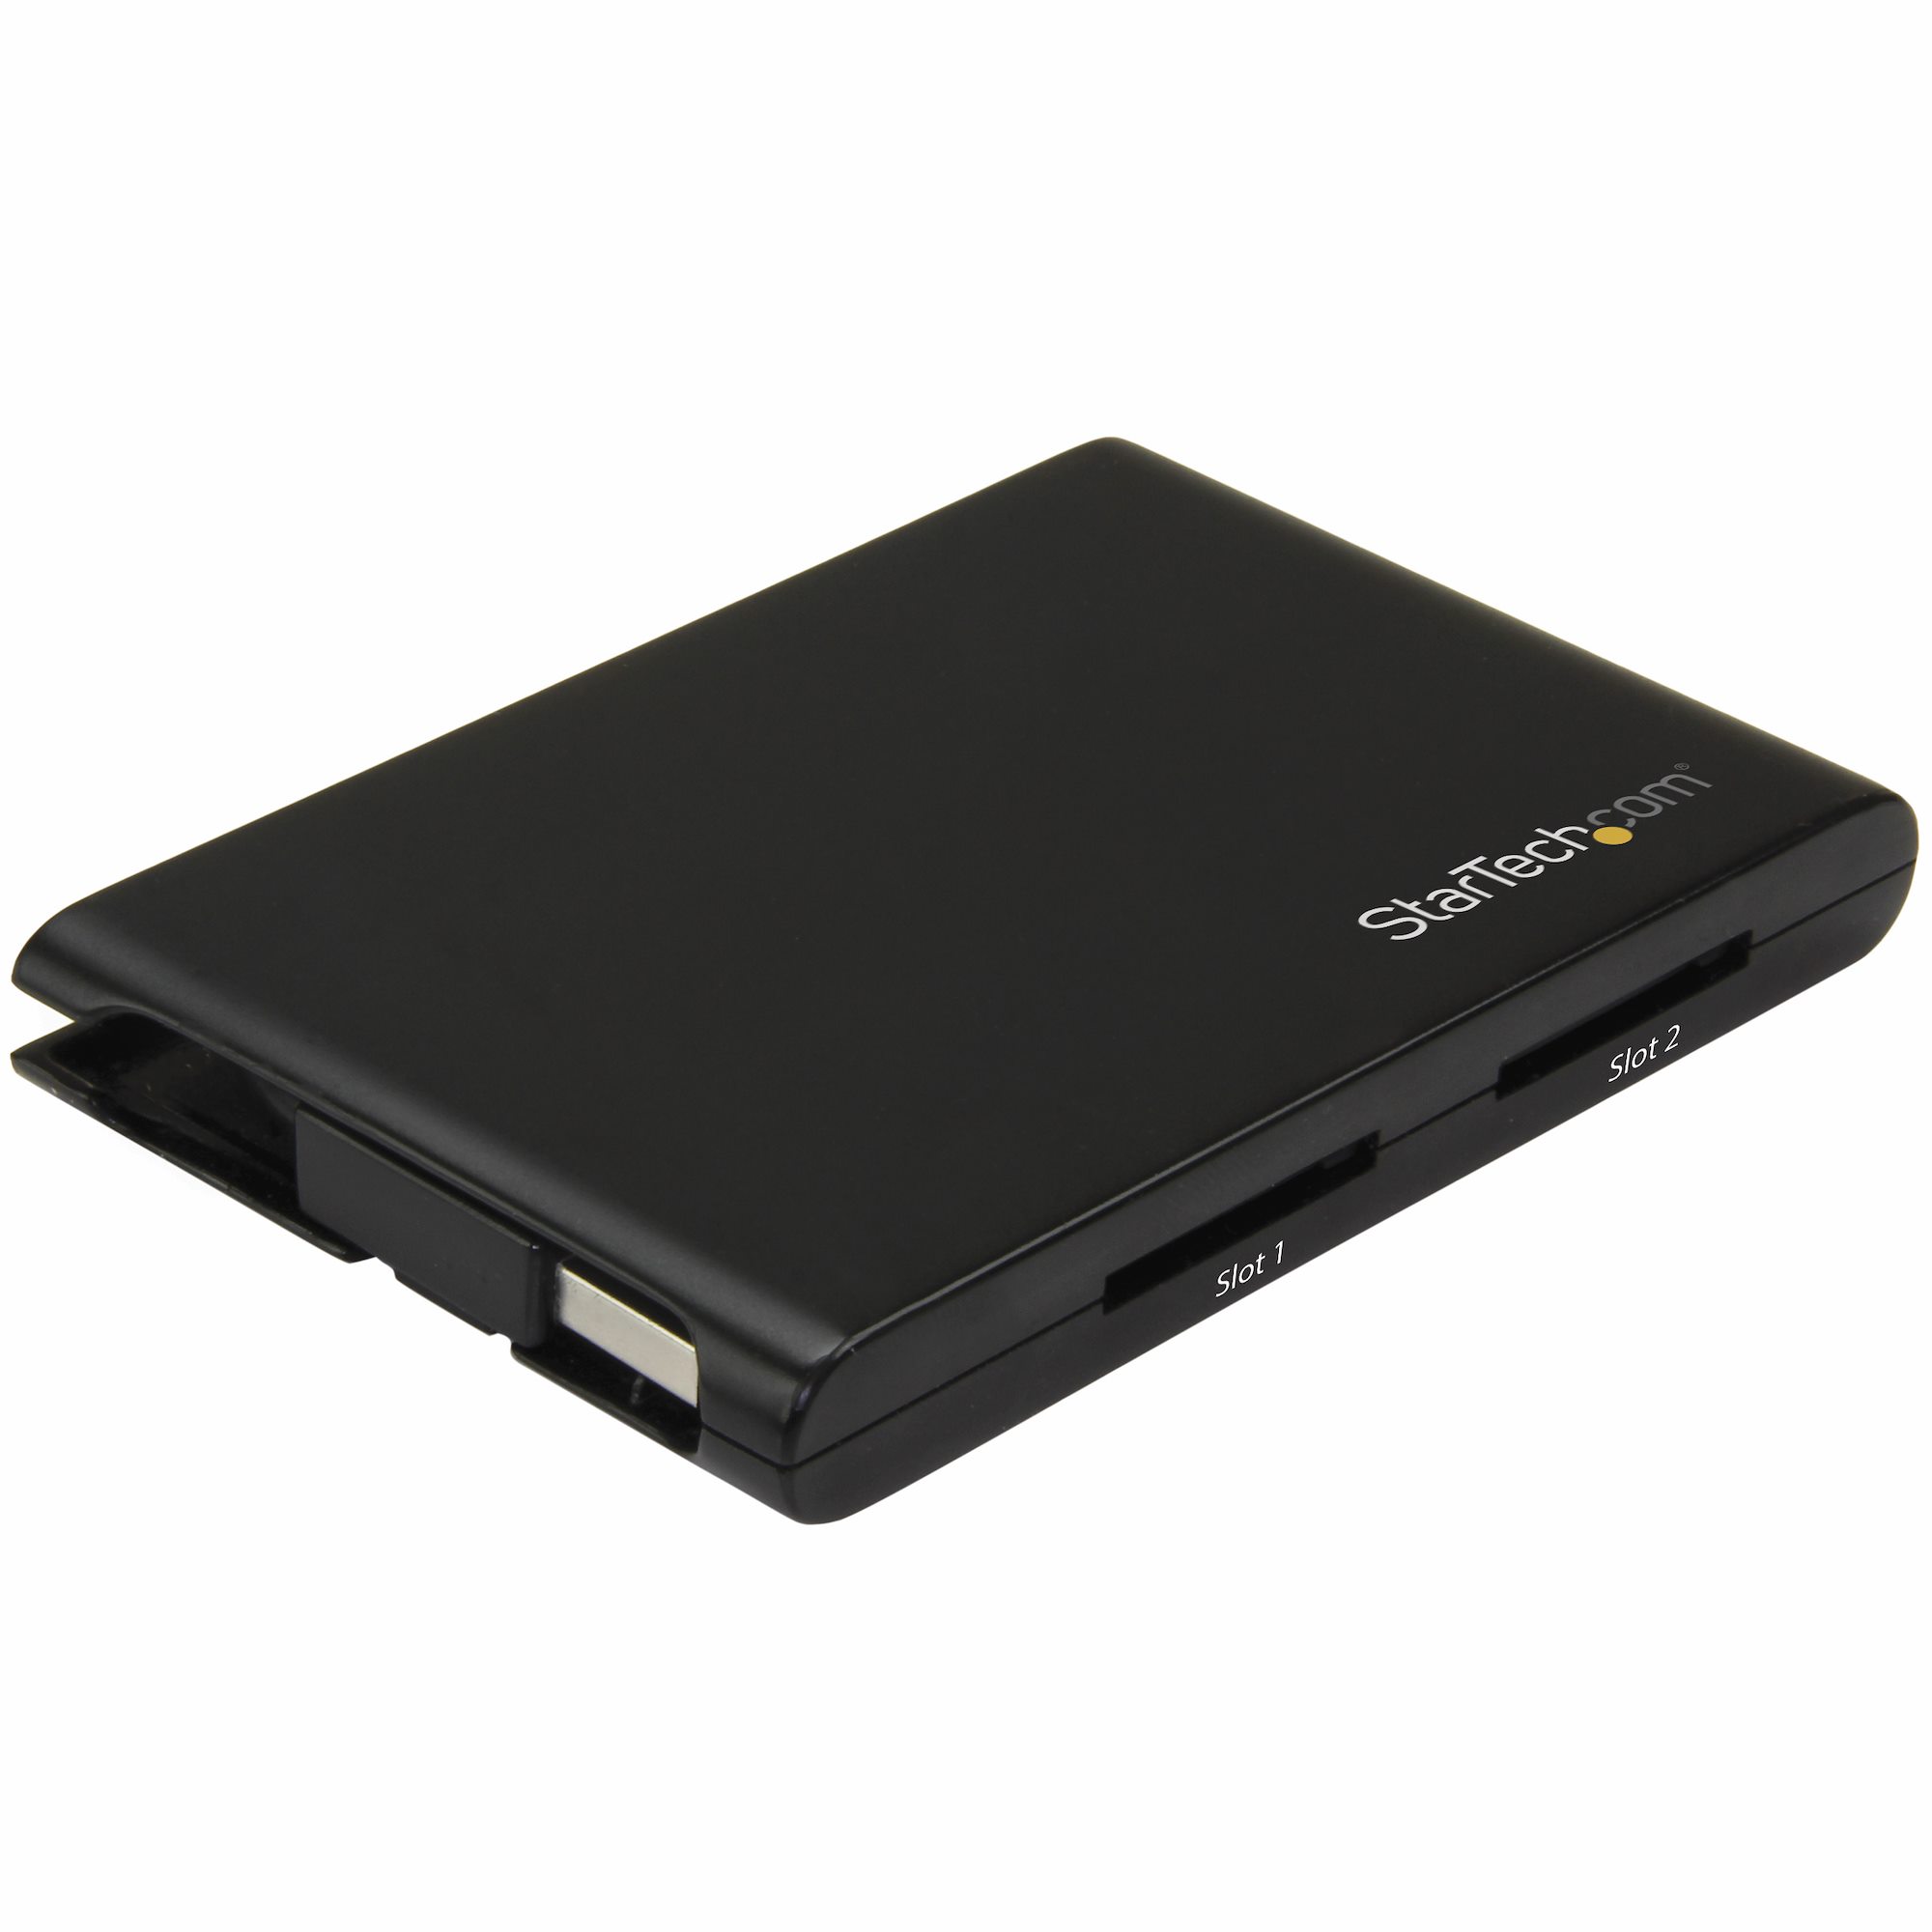 All-in-One Portable USB 2.0 Card Reader and 3-Port Hub - Mobile Edge